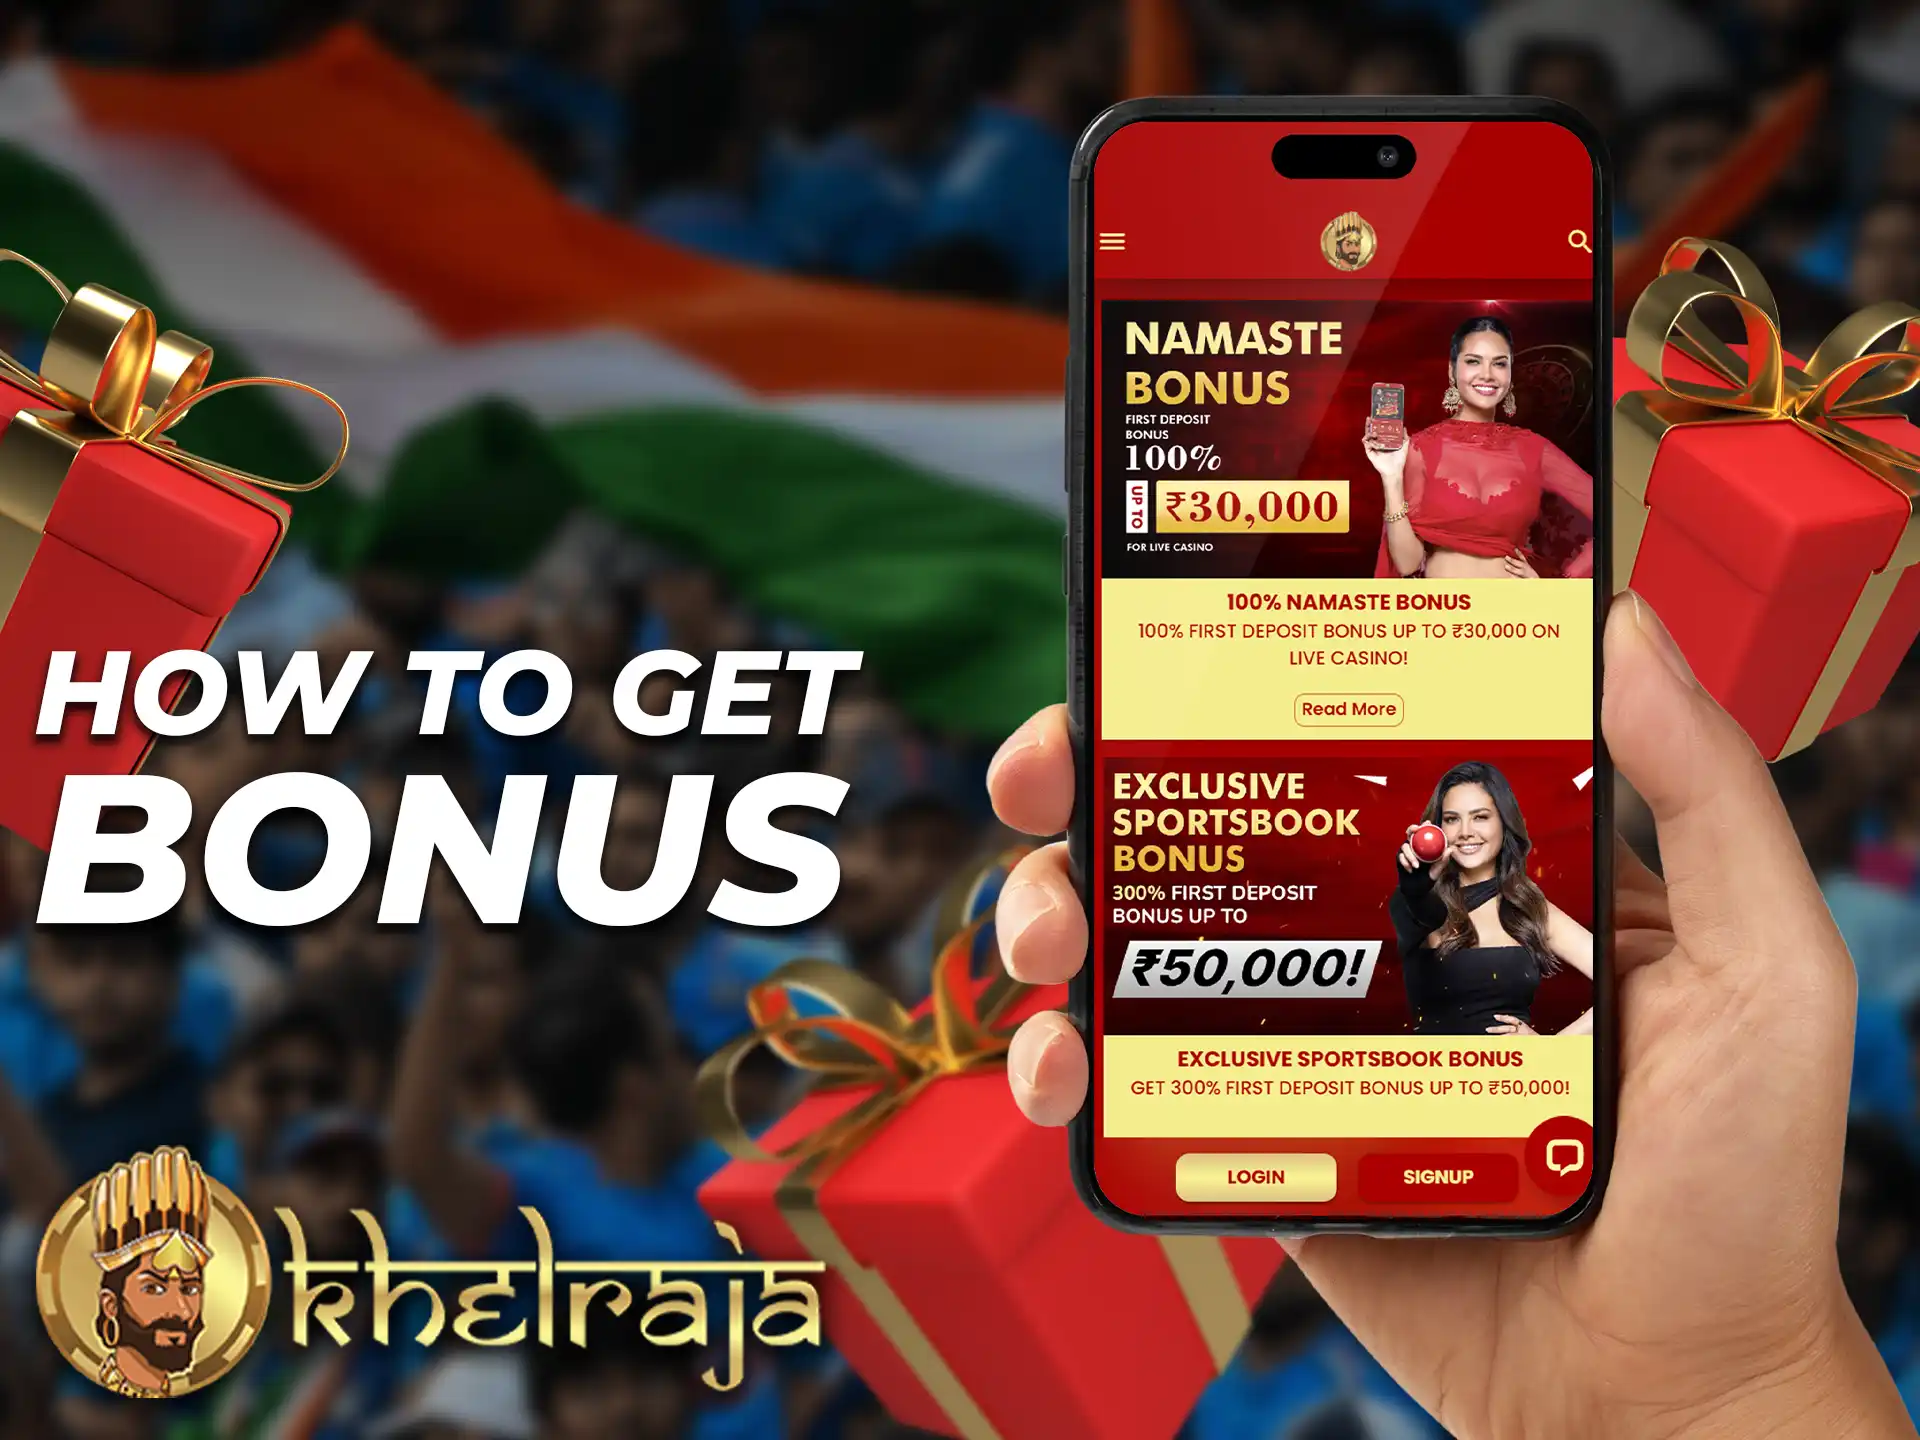 To get the welcome bonus download the Khelraja app and create an account.